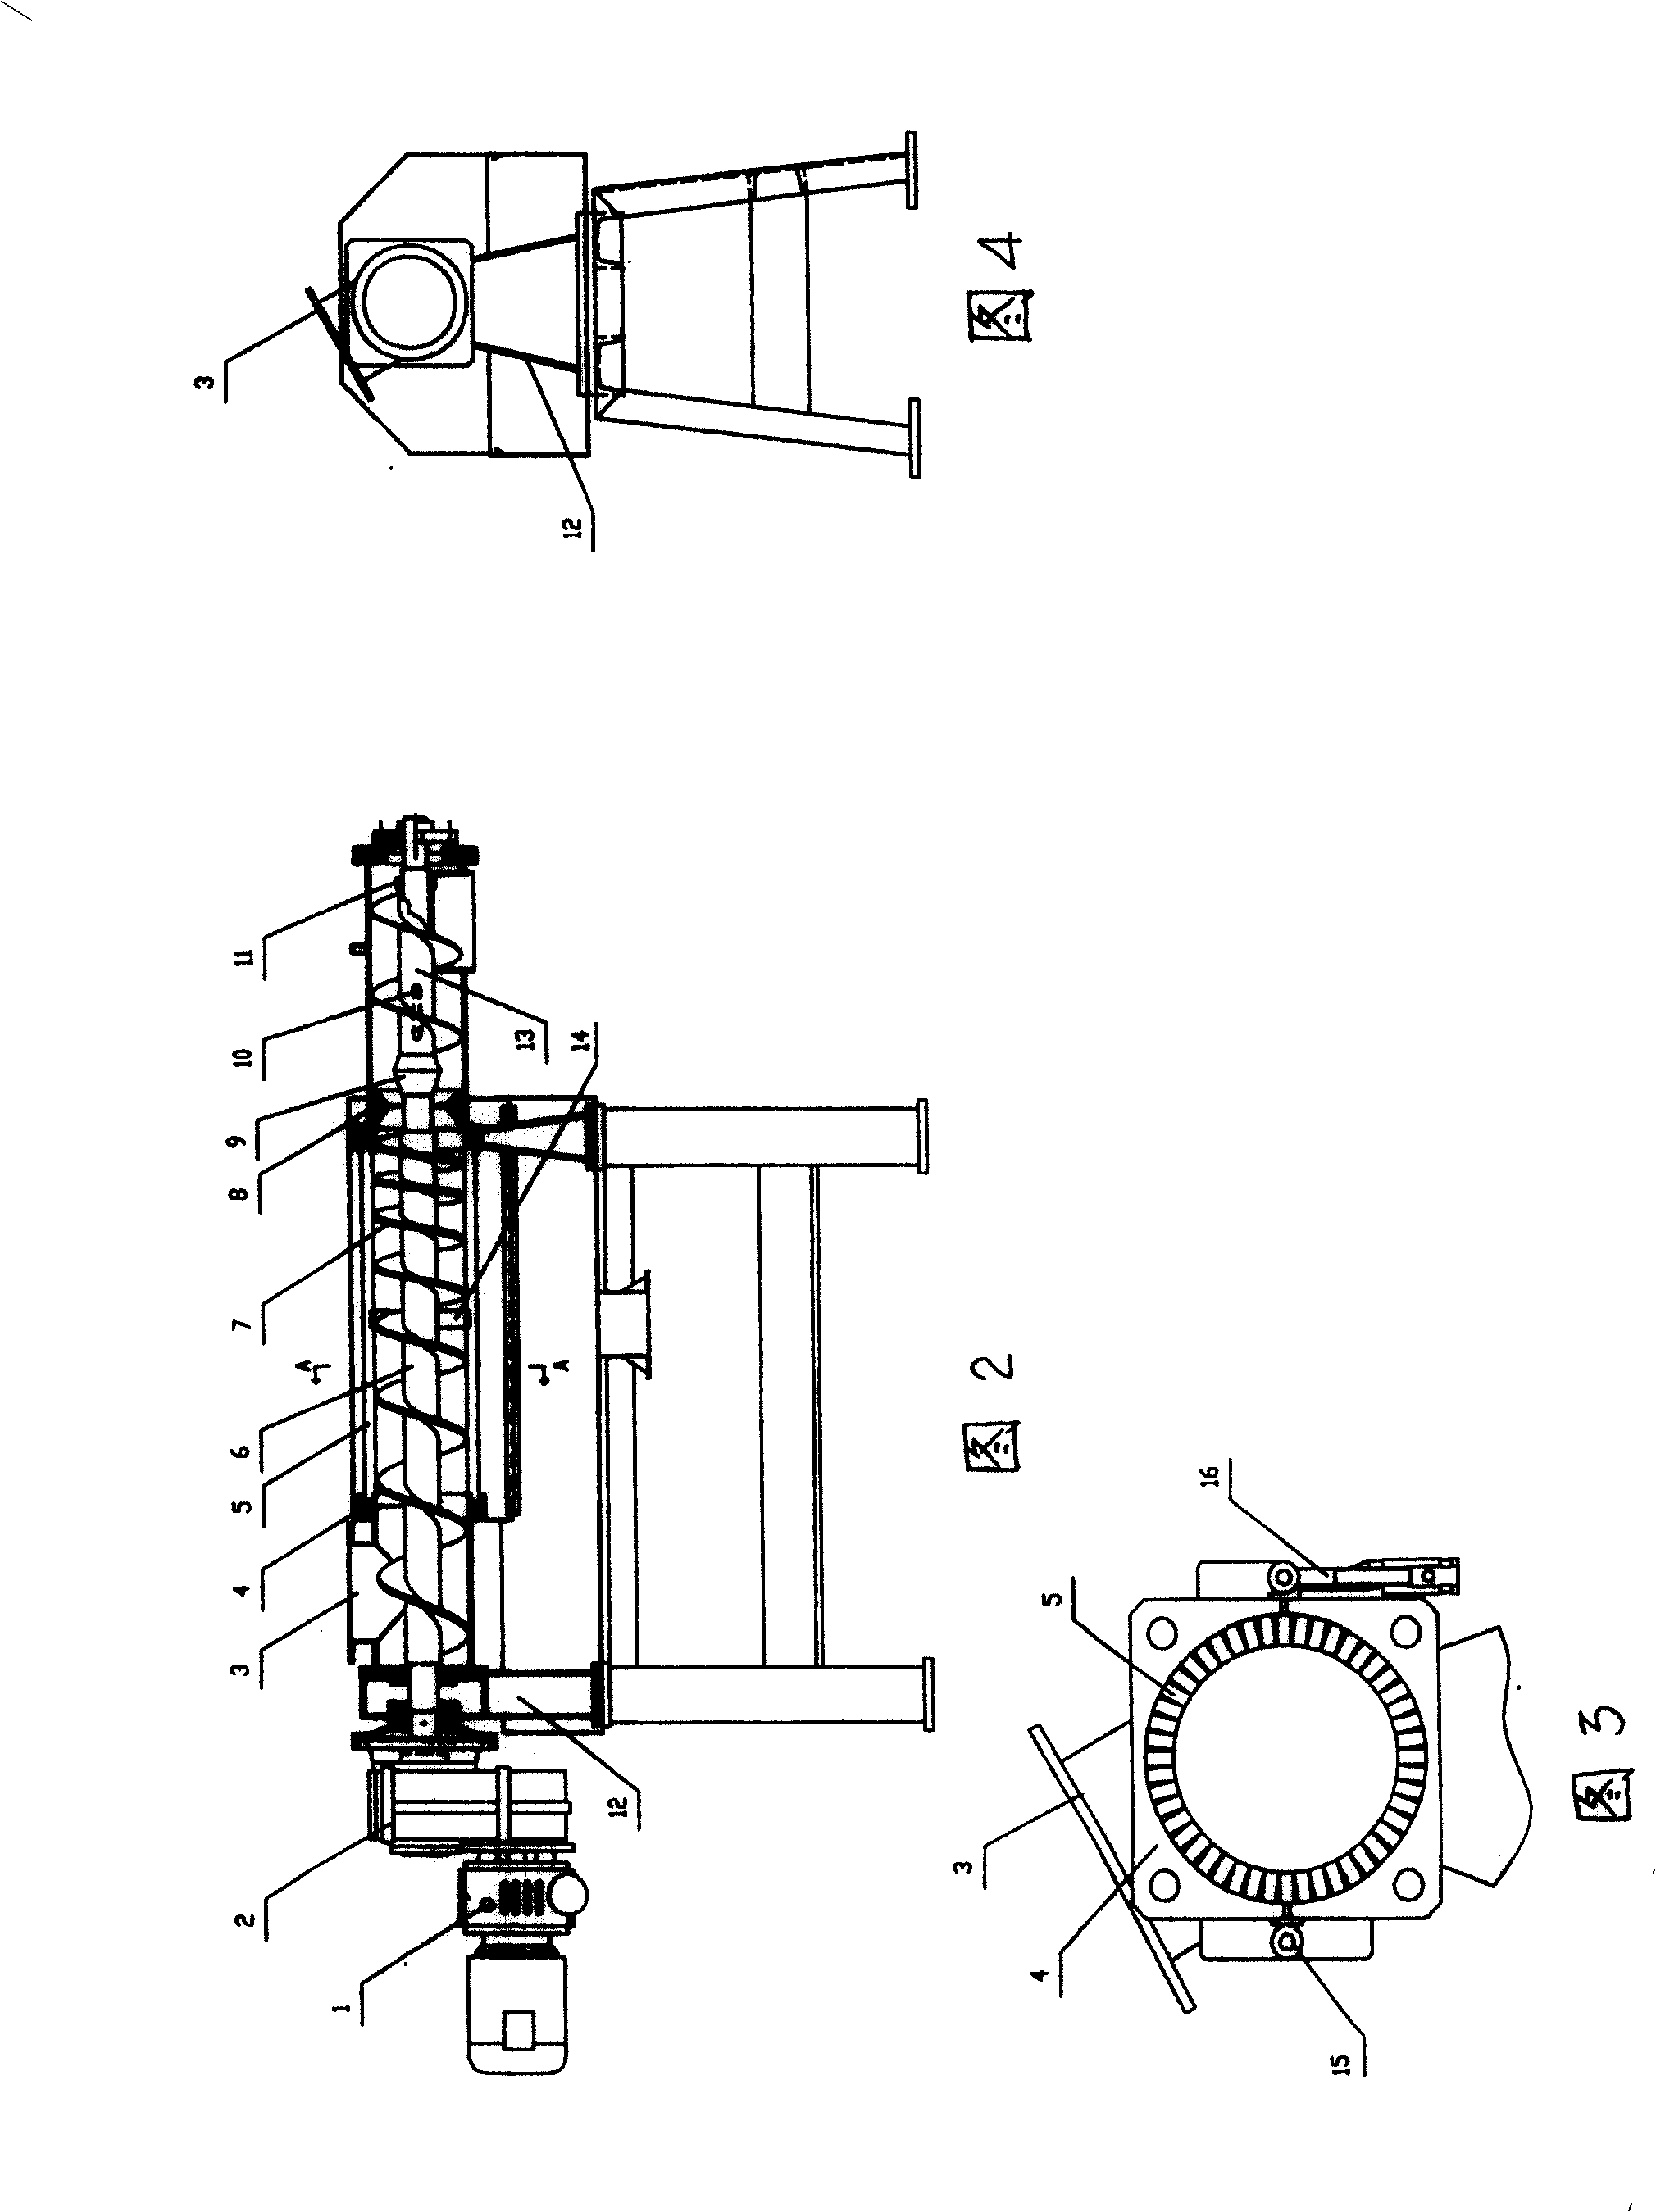 Method and apparatus for treating organic waste